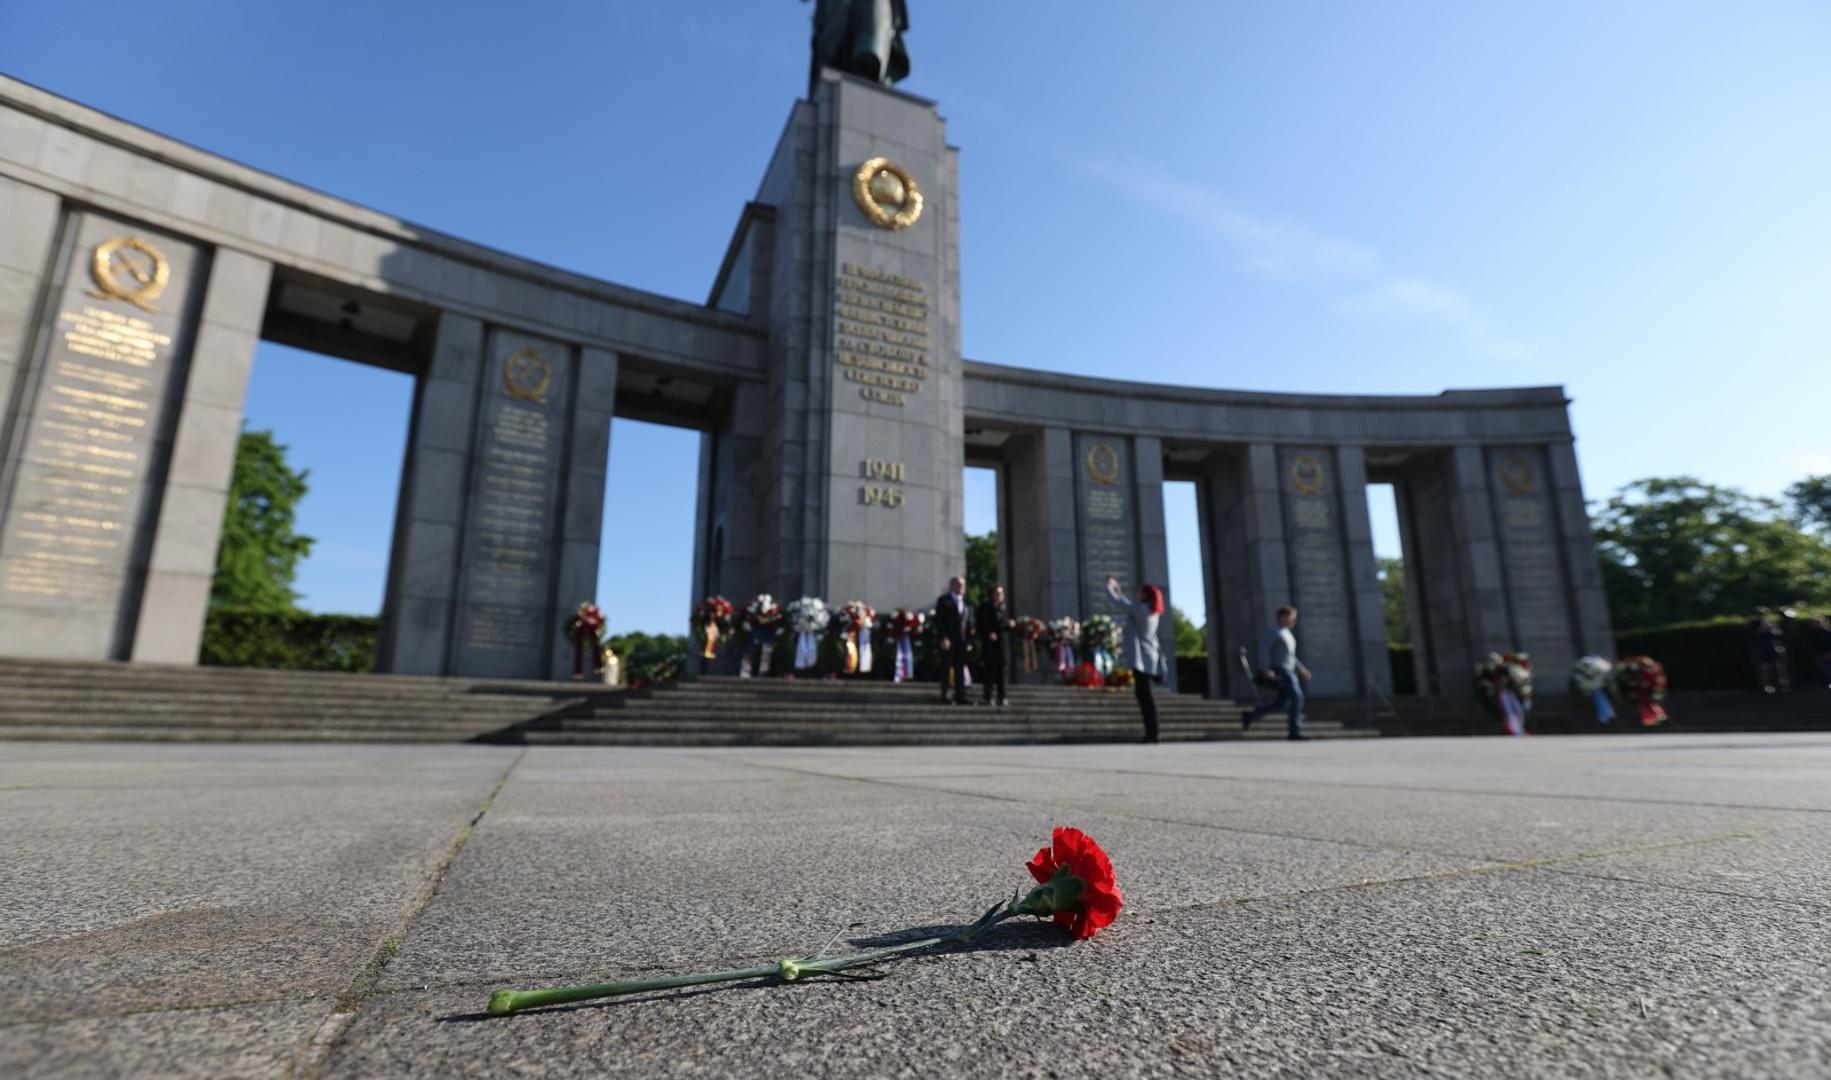 Events commemorating the end of World War Two in Berlin A carnation is placed to mark Victory Day and the 75th anniversary of the end of World War Two at the Soviet War Memorial at Tiergarten Park in Berlin, Germany, May 8, 2020. REUTERS/Fabrizio Bensch FABRIZIO BENSCH